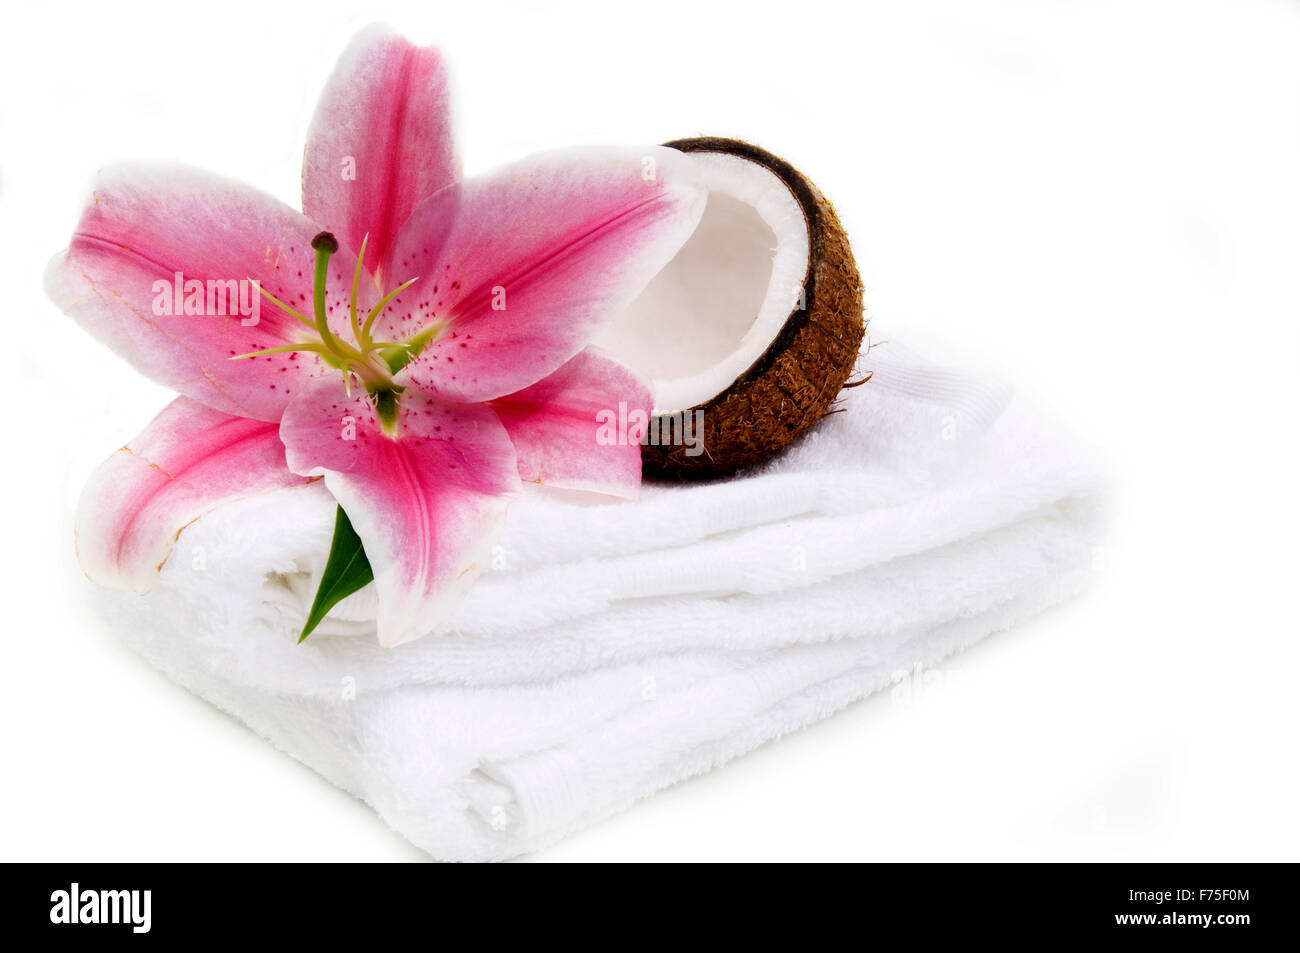 Coconut, lilly flower and white towel Stock Photo